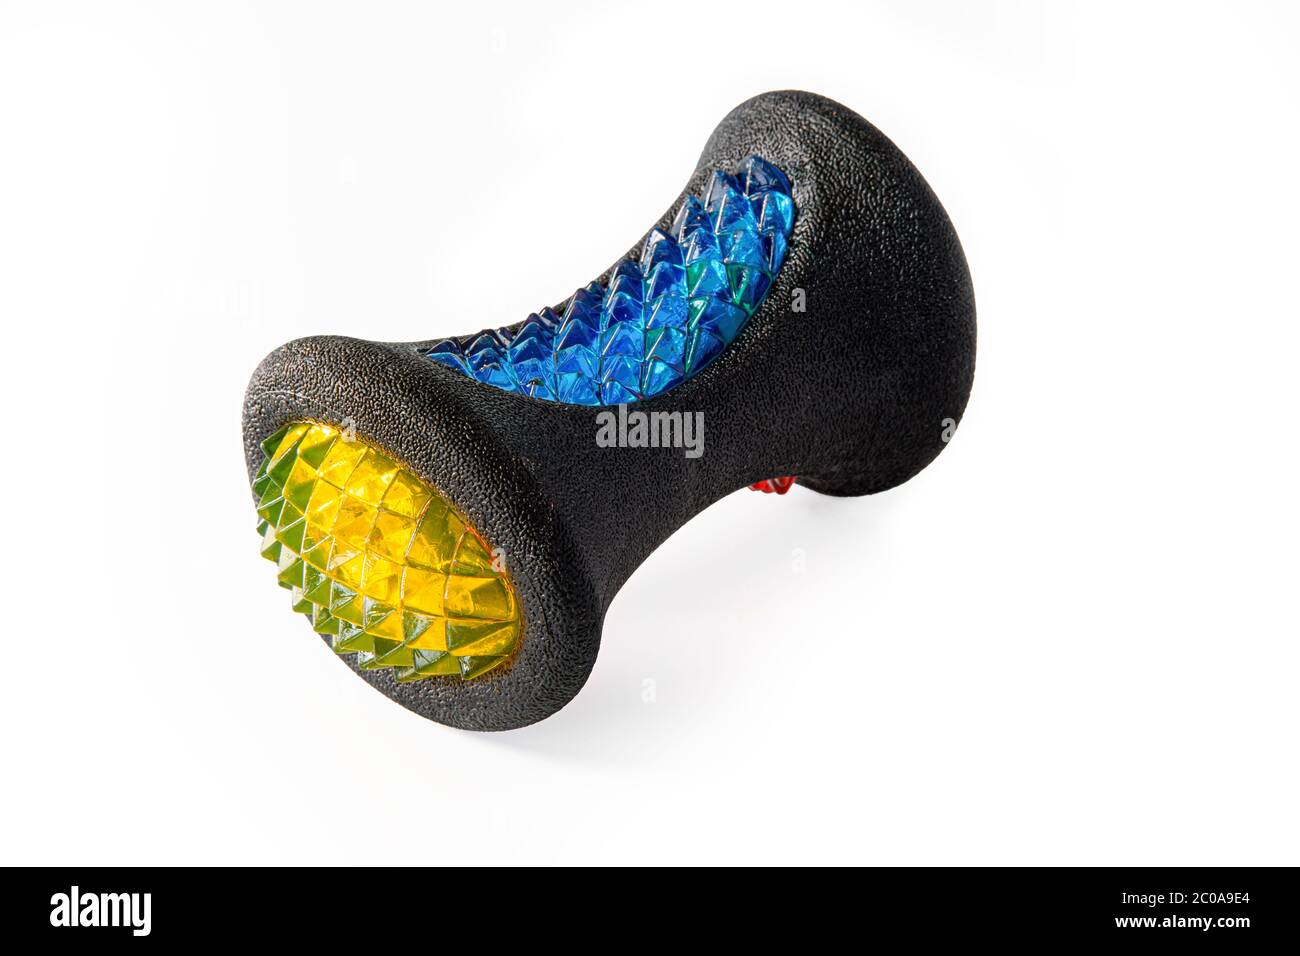 Multi colored dog toy with flashing lights. Stock Photo